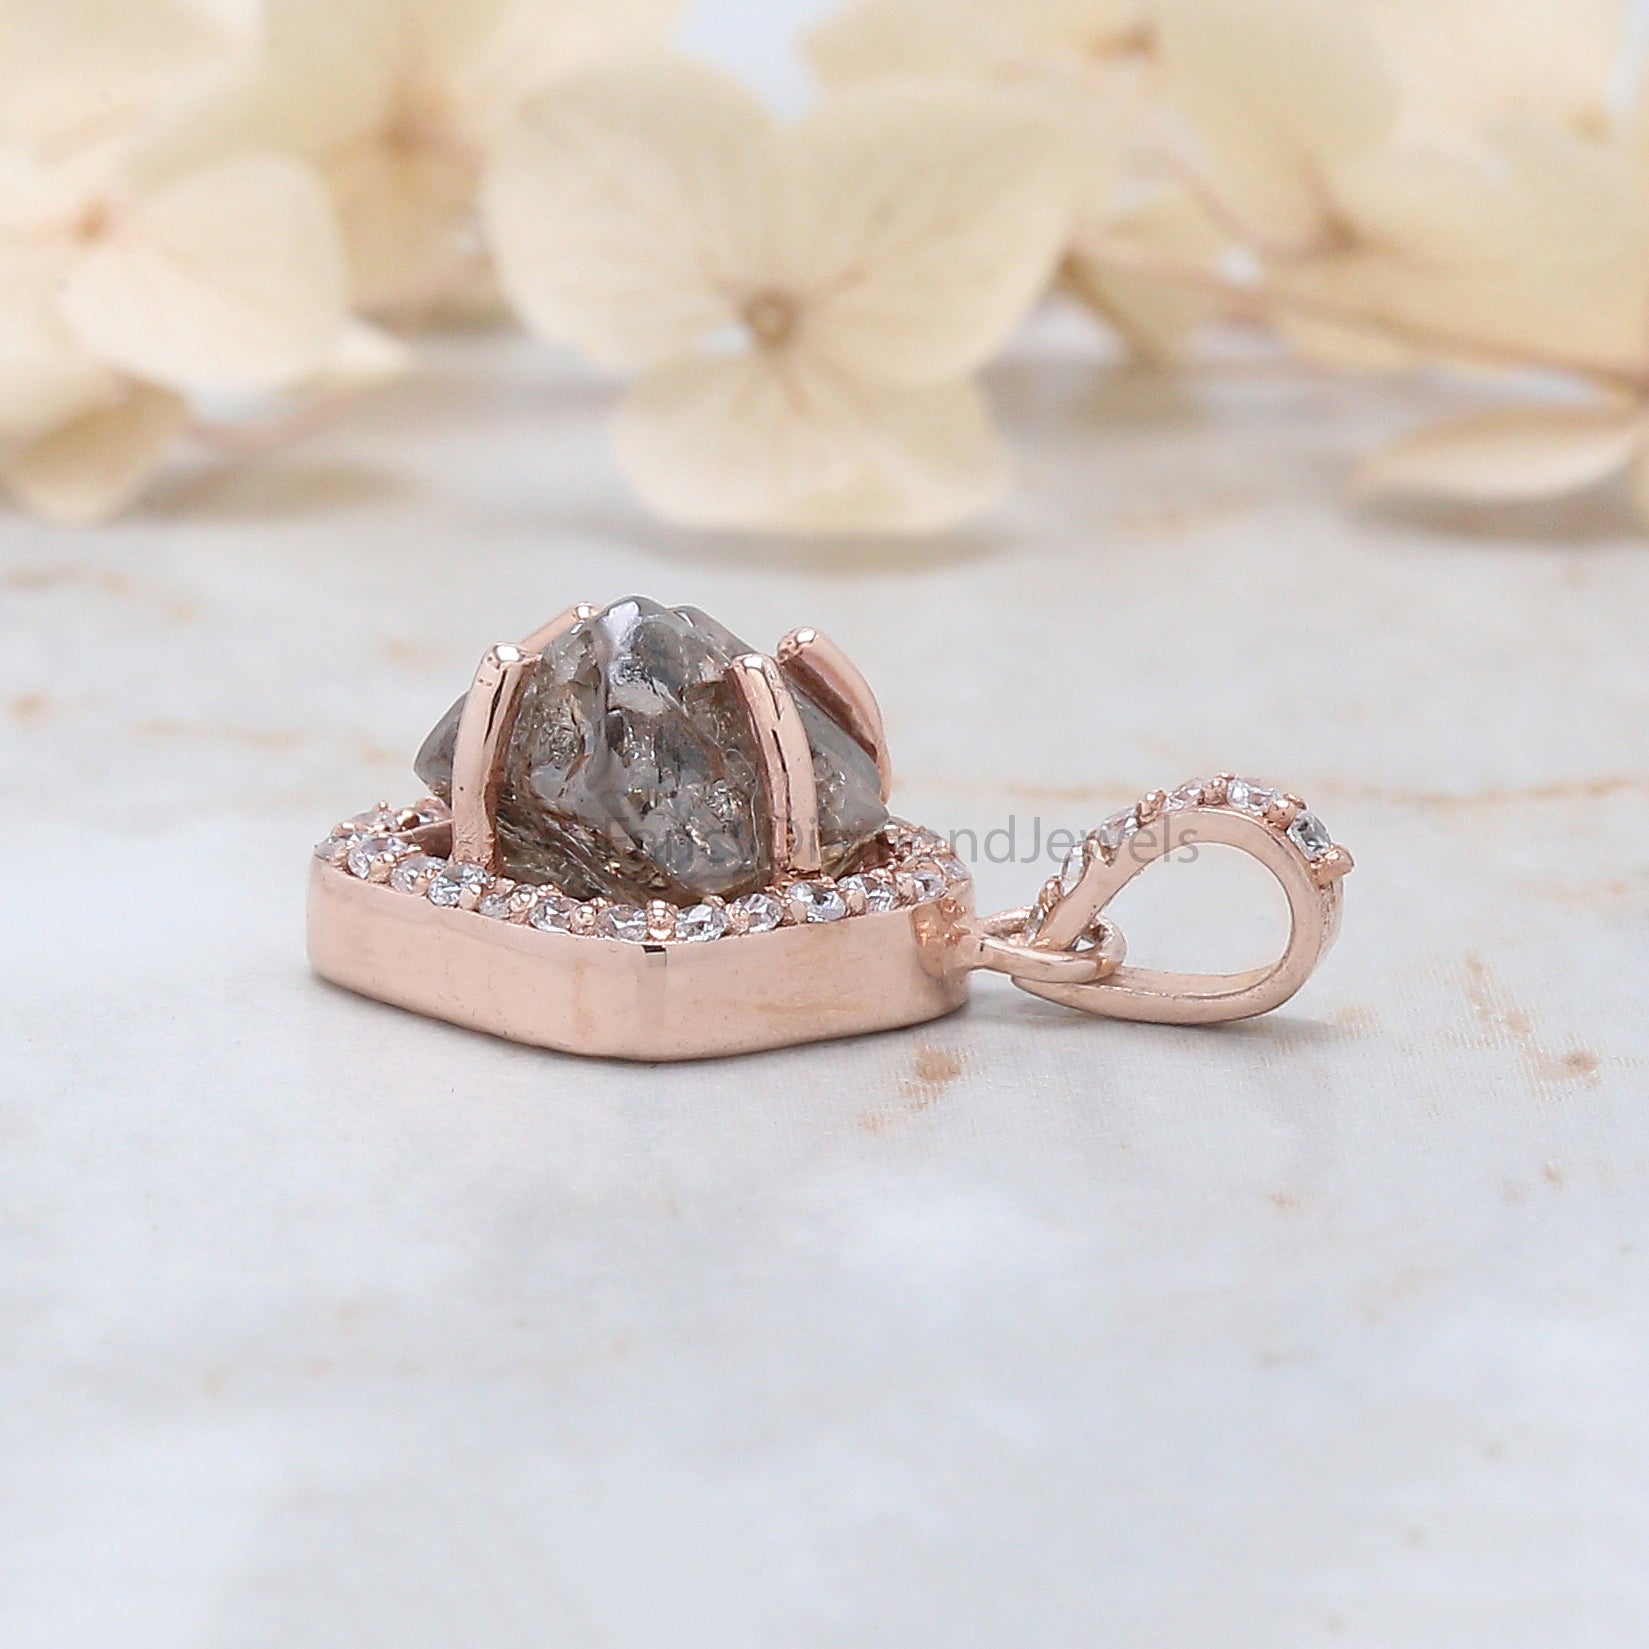 Rough Brown Color Diamond Pendant 3.36 Ct 9.70 MM Rough Diamond Pendant Solid Rose Gold Silver Engagement Pendant Gift For Her QN284